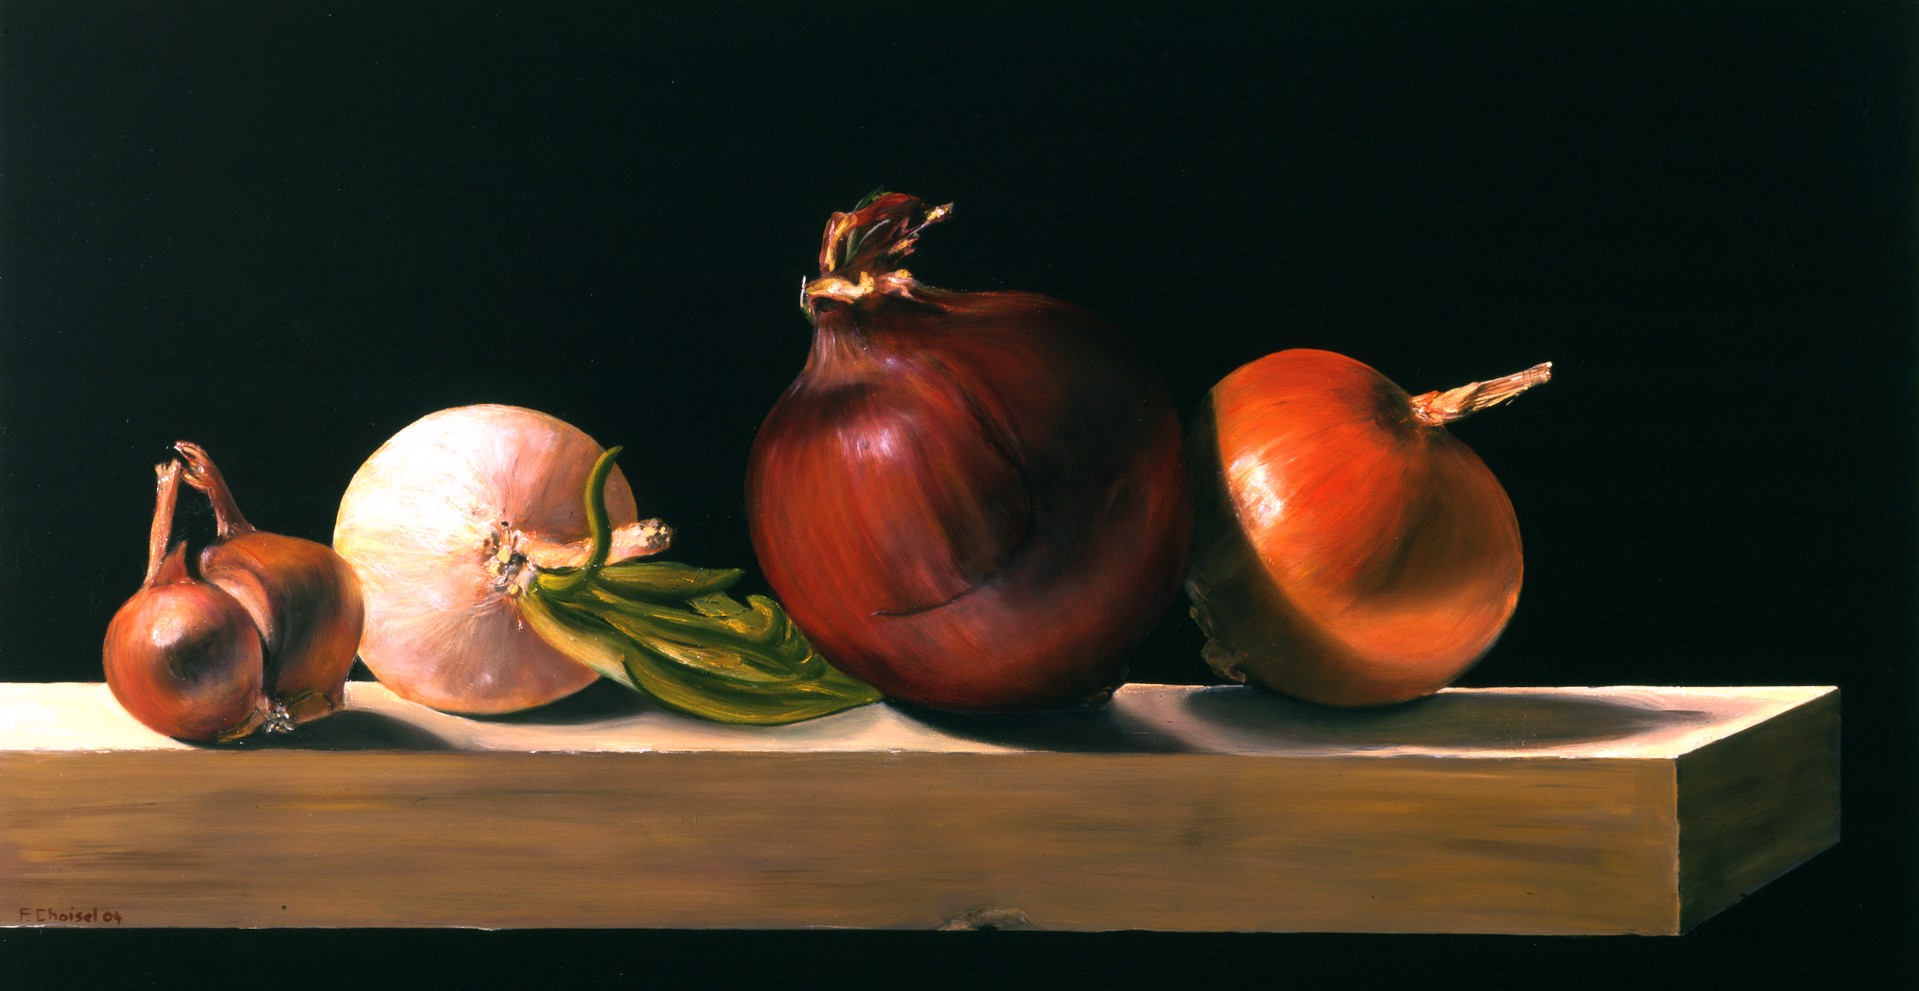 Four Onions on Stone by Frederic Choisel